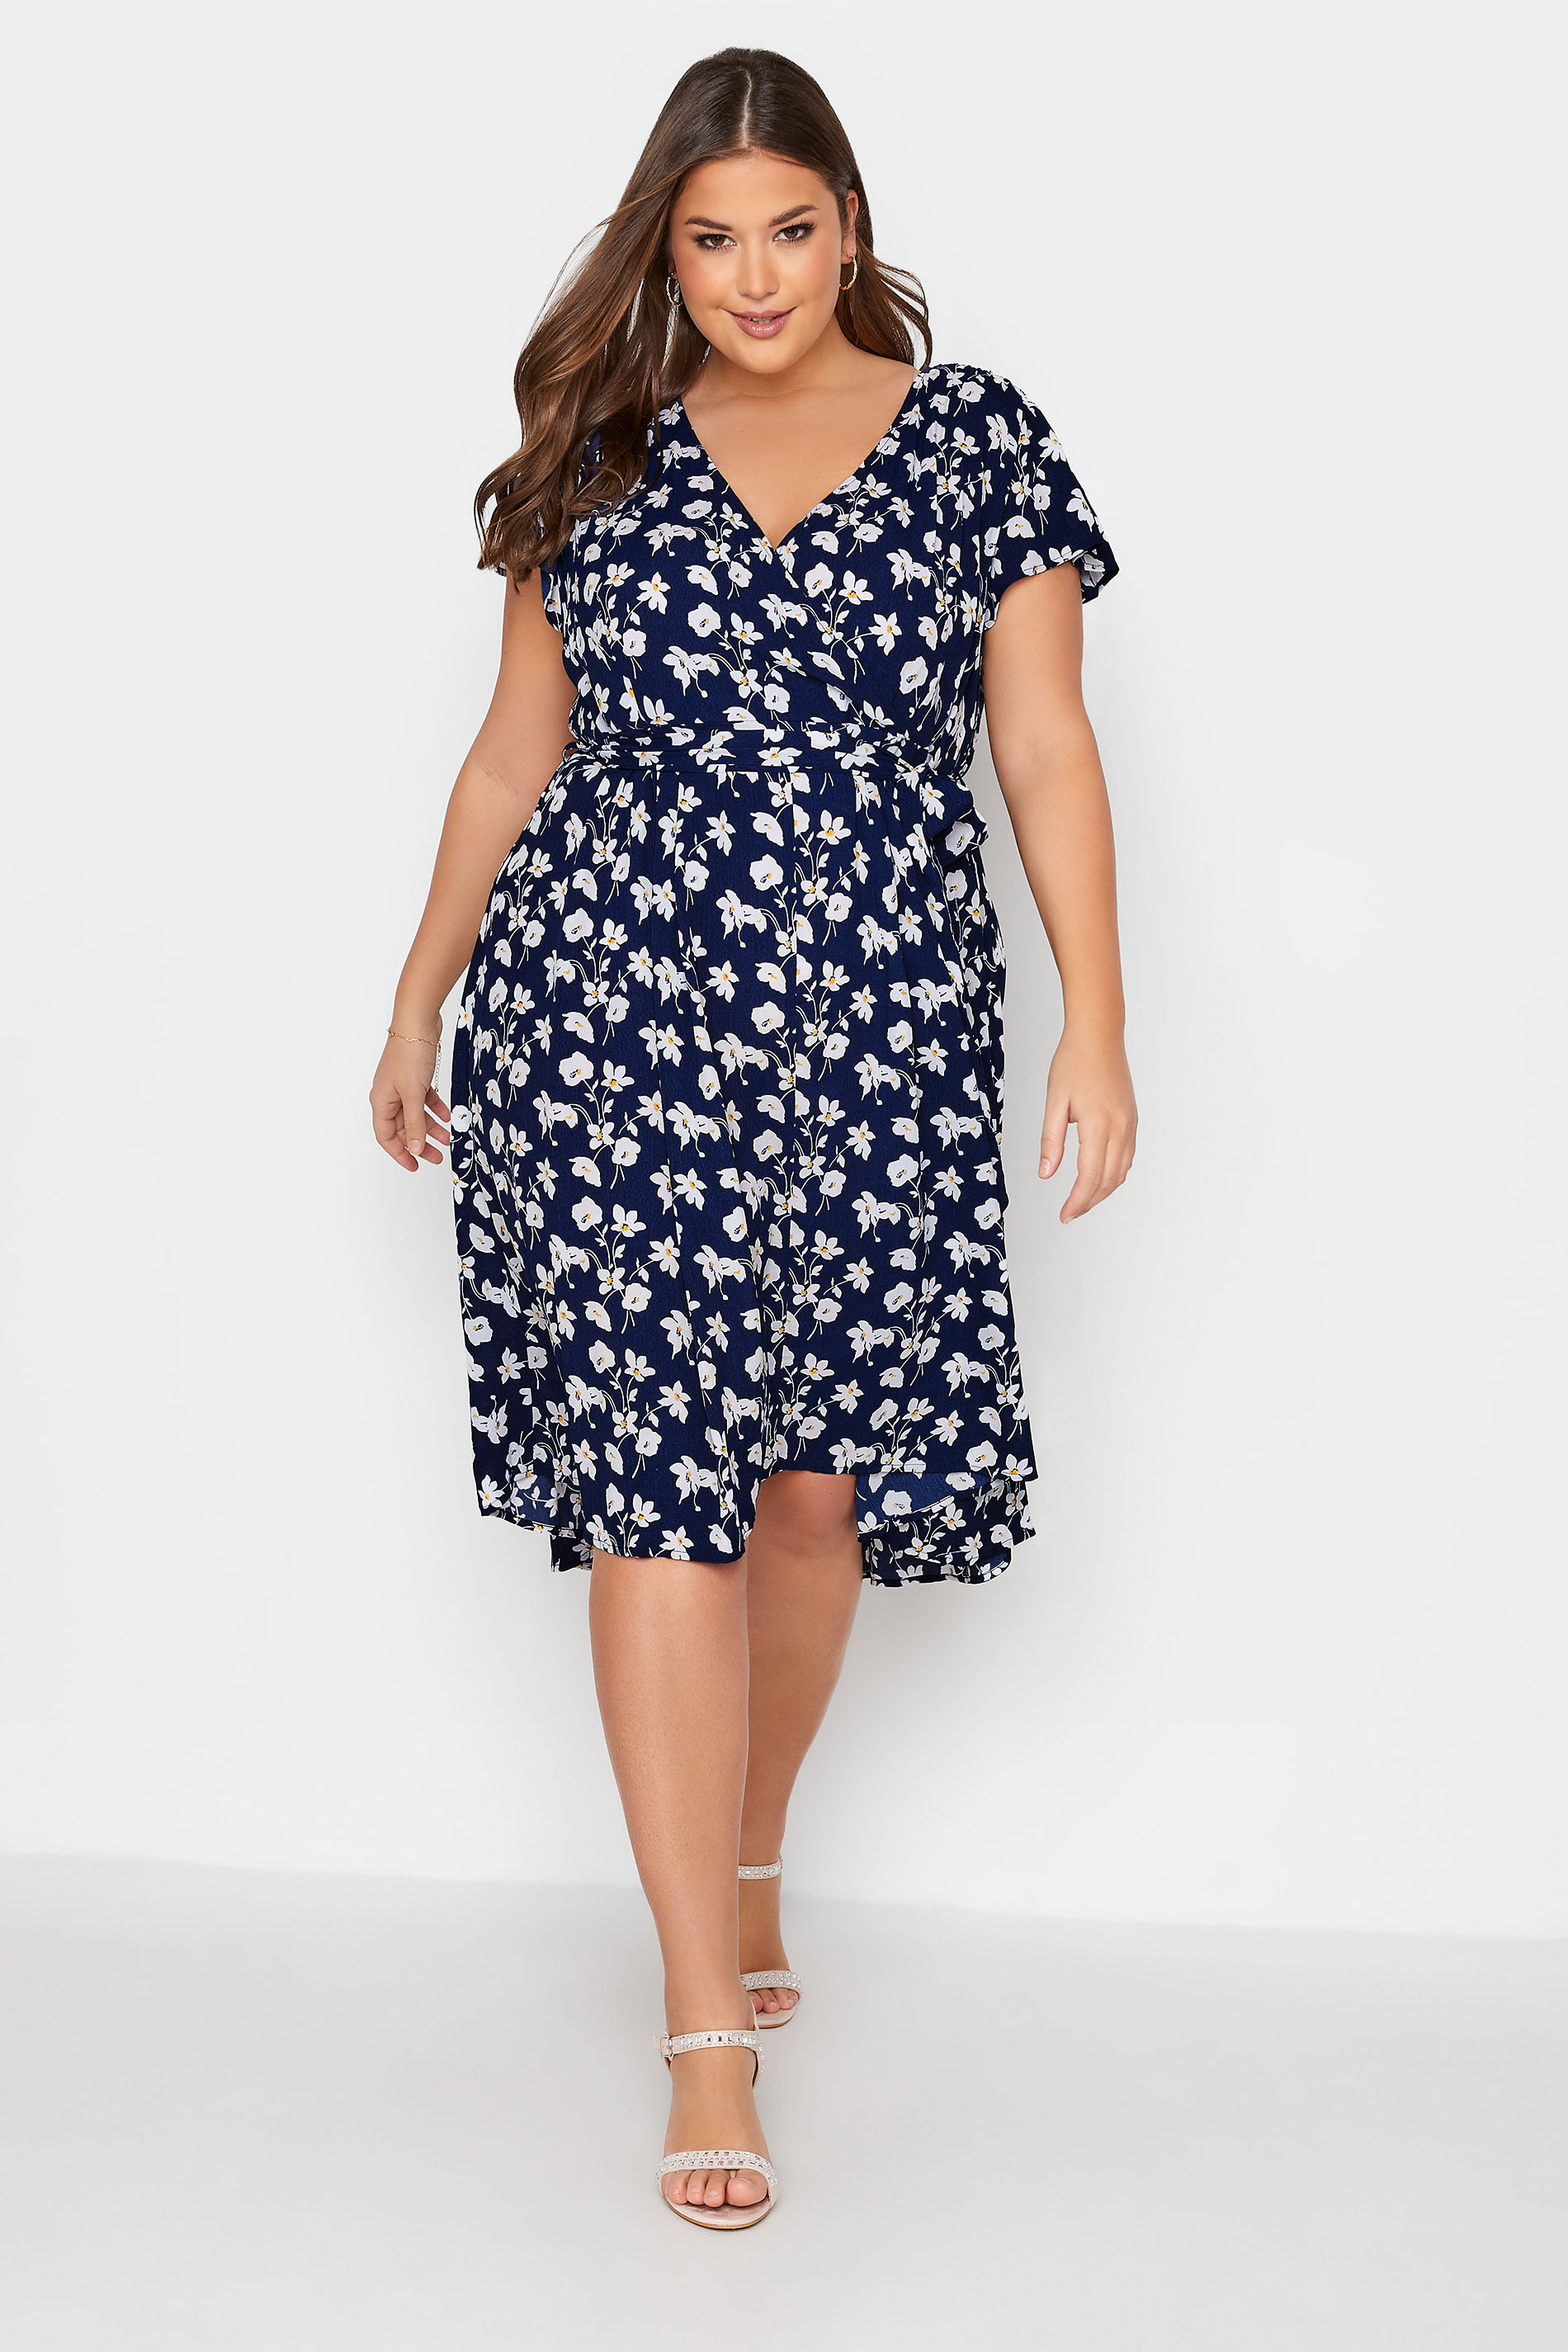 Robes Grande Taille Grande taille  Robes Portefeuilles | YOURS LONDON - Robe Midi Bleue Marine Floral Cache-Coeur - PM41850